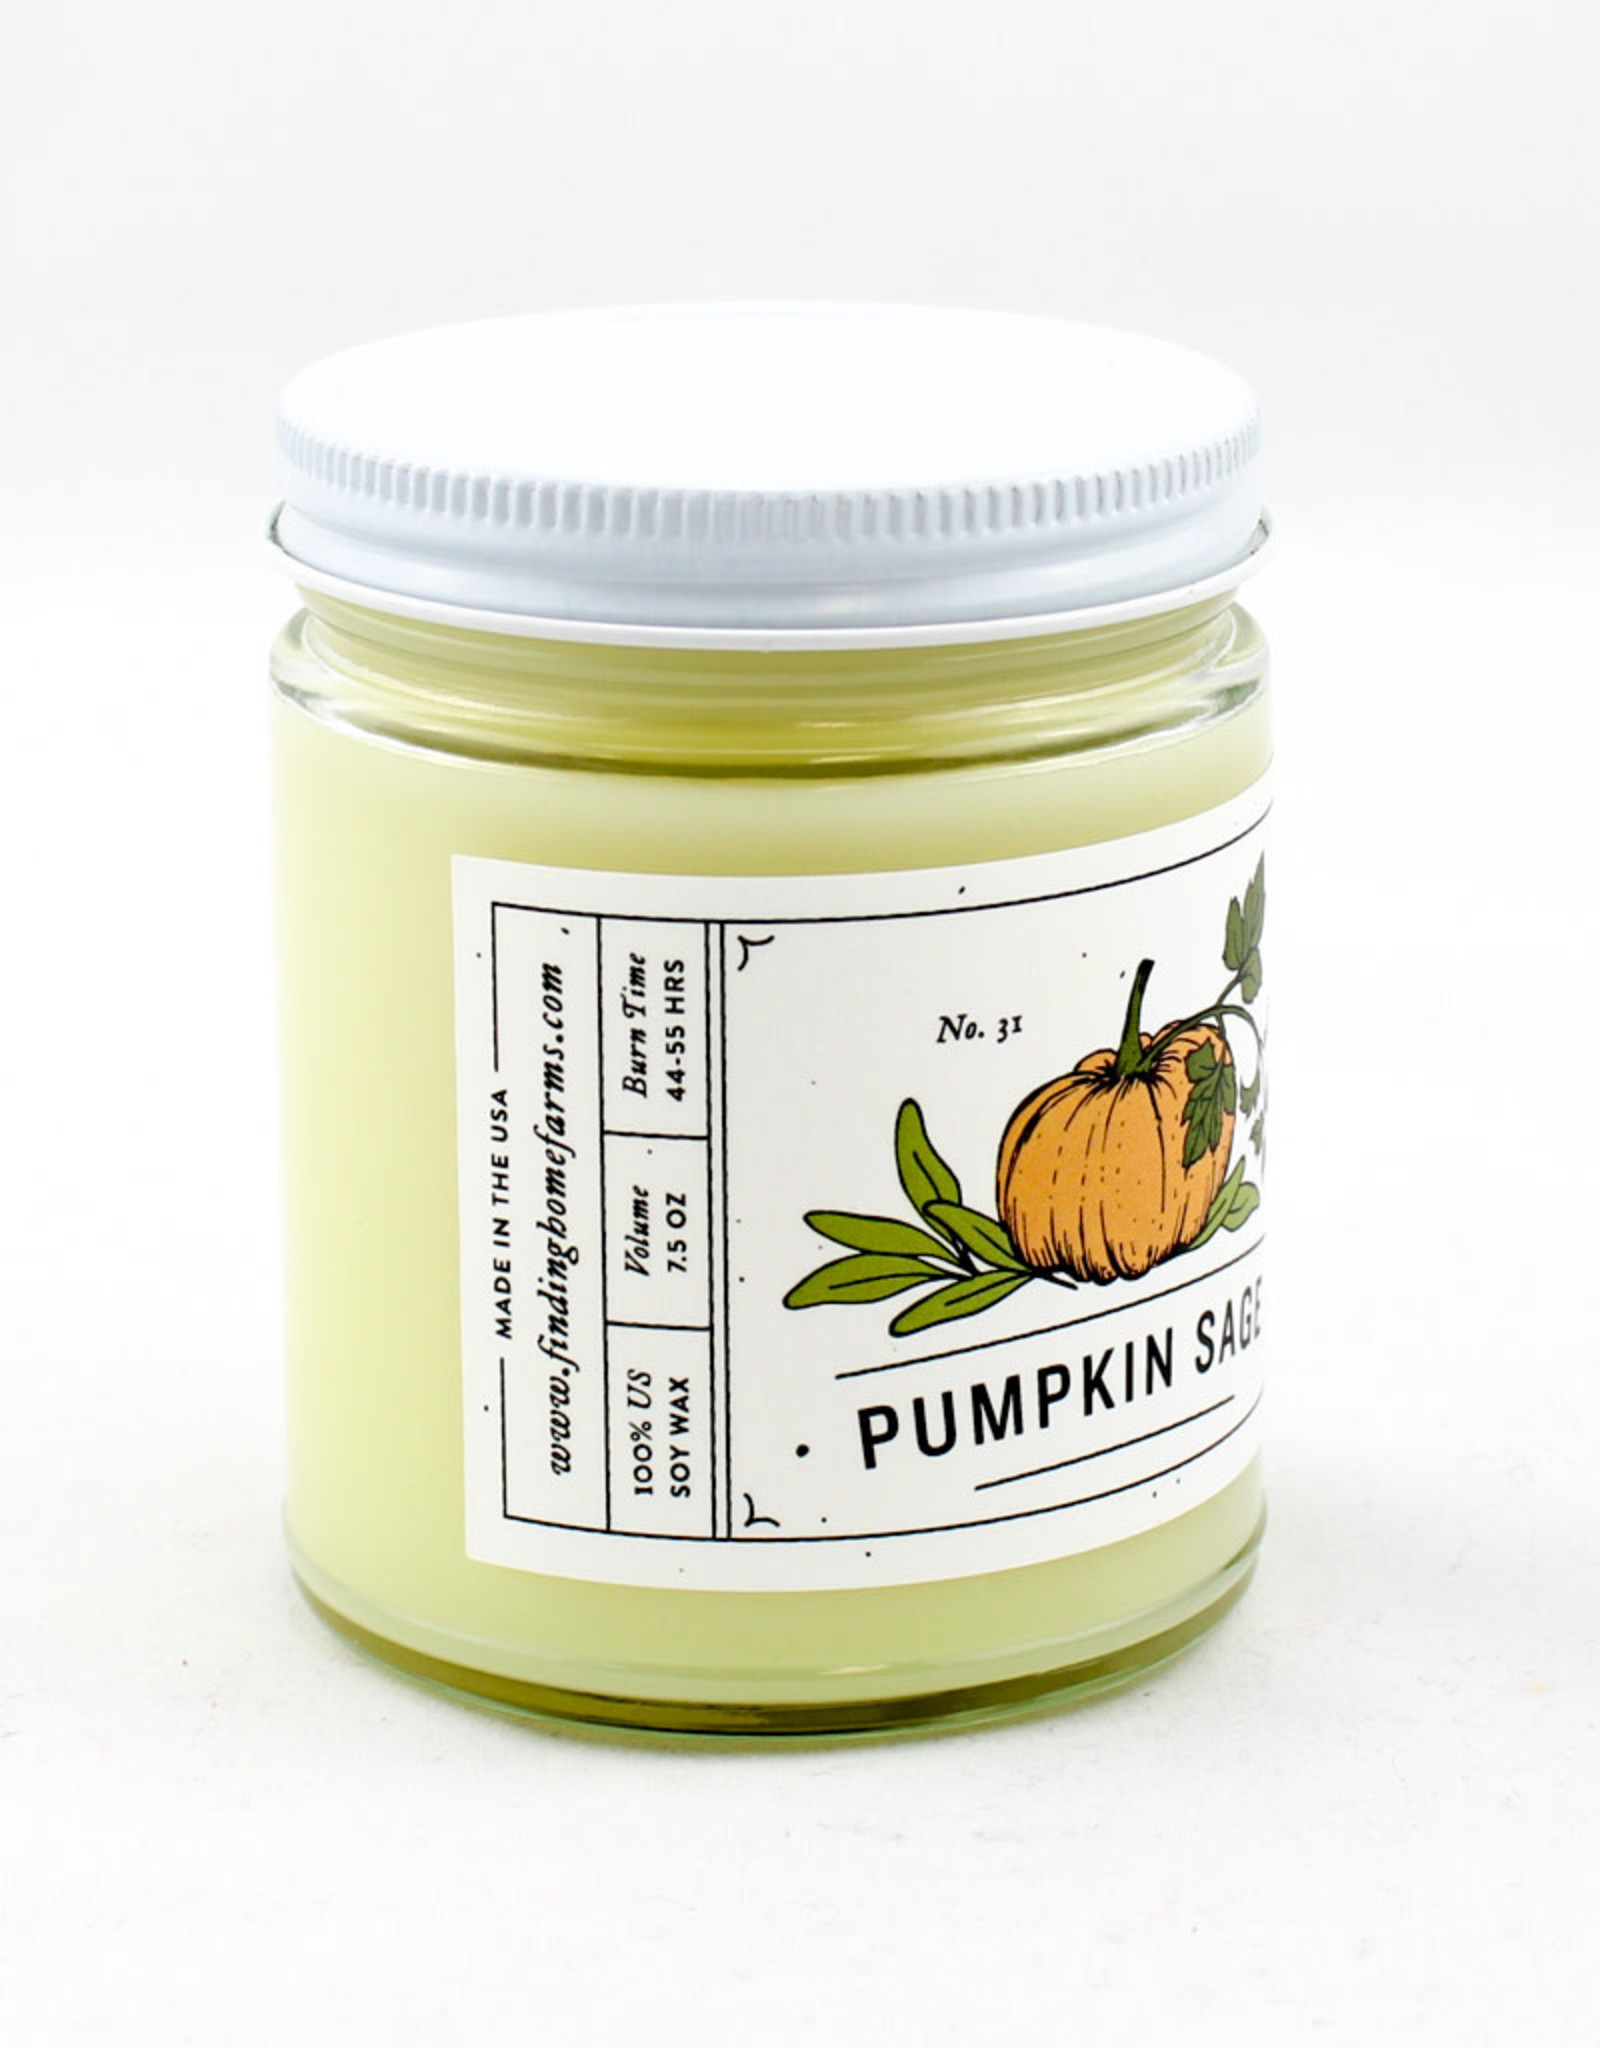 Finding Home Farms Pumpkin Sage Candle - Small